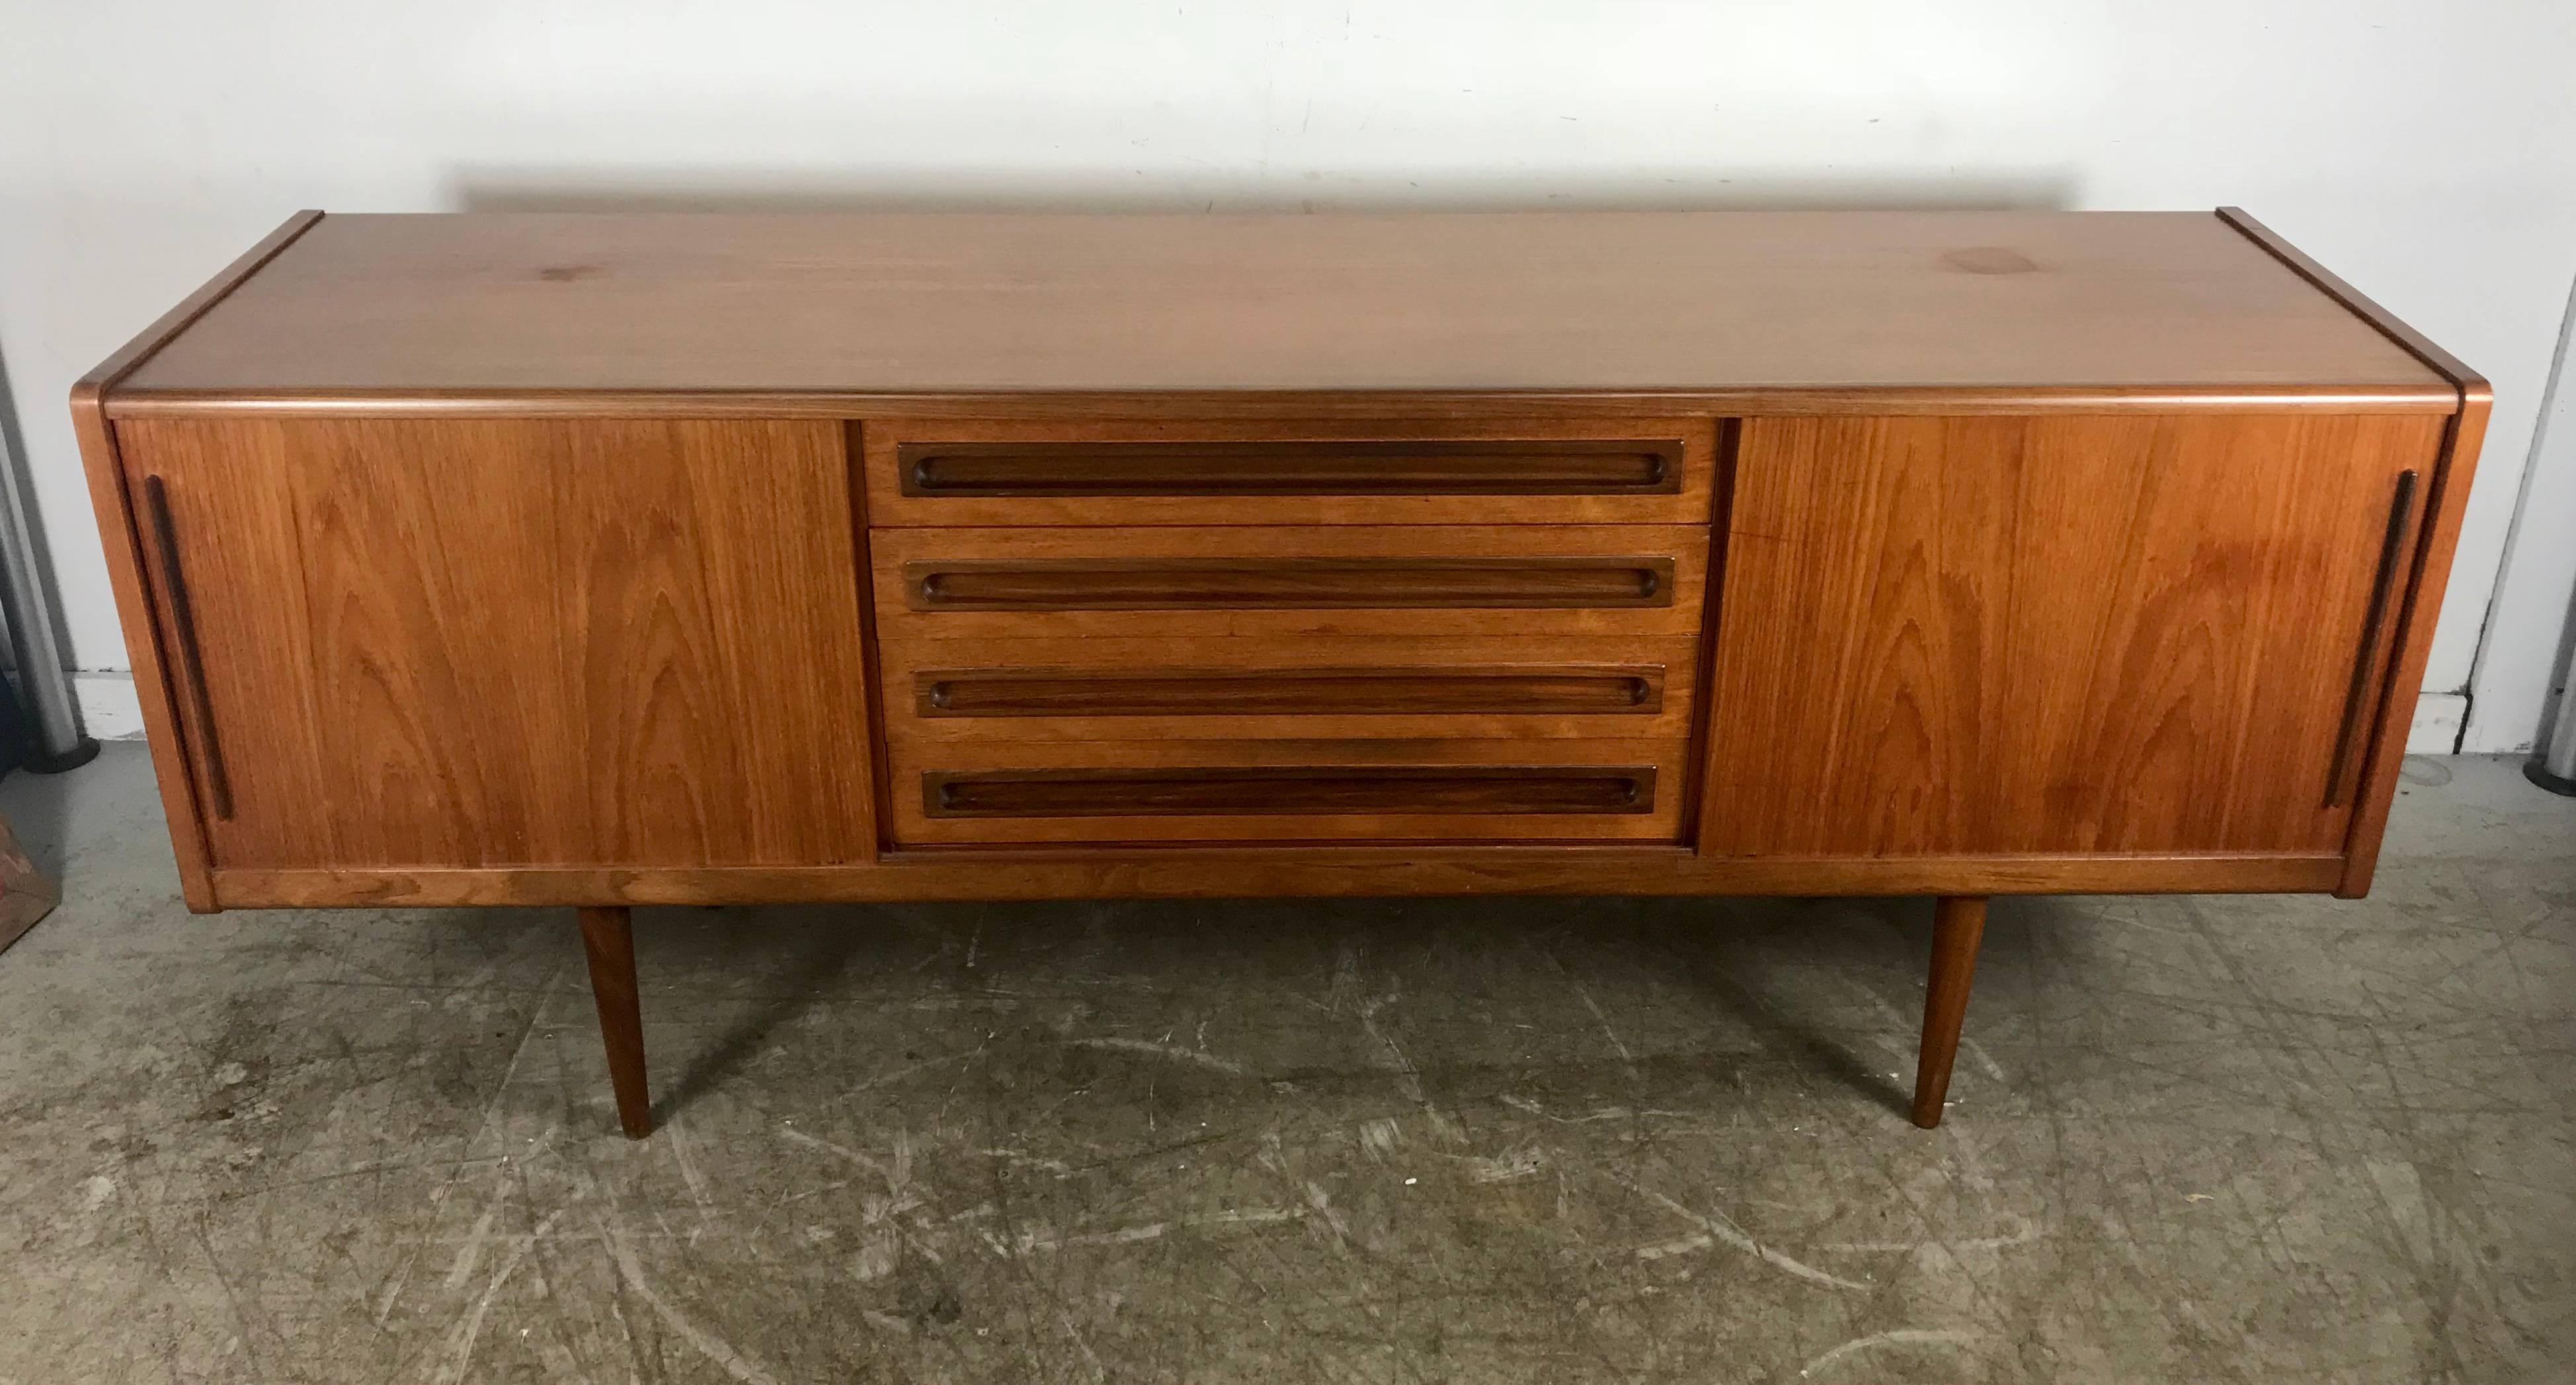 Quality Danish modern / Scandinavian teak credenza or buffet has a gorgeous patina and graining, as well as a beautifully finished back. The centre four drawers are solid teak drawer fronts dovetailed with wood frame drawer construction. Note the